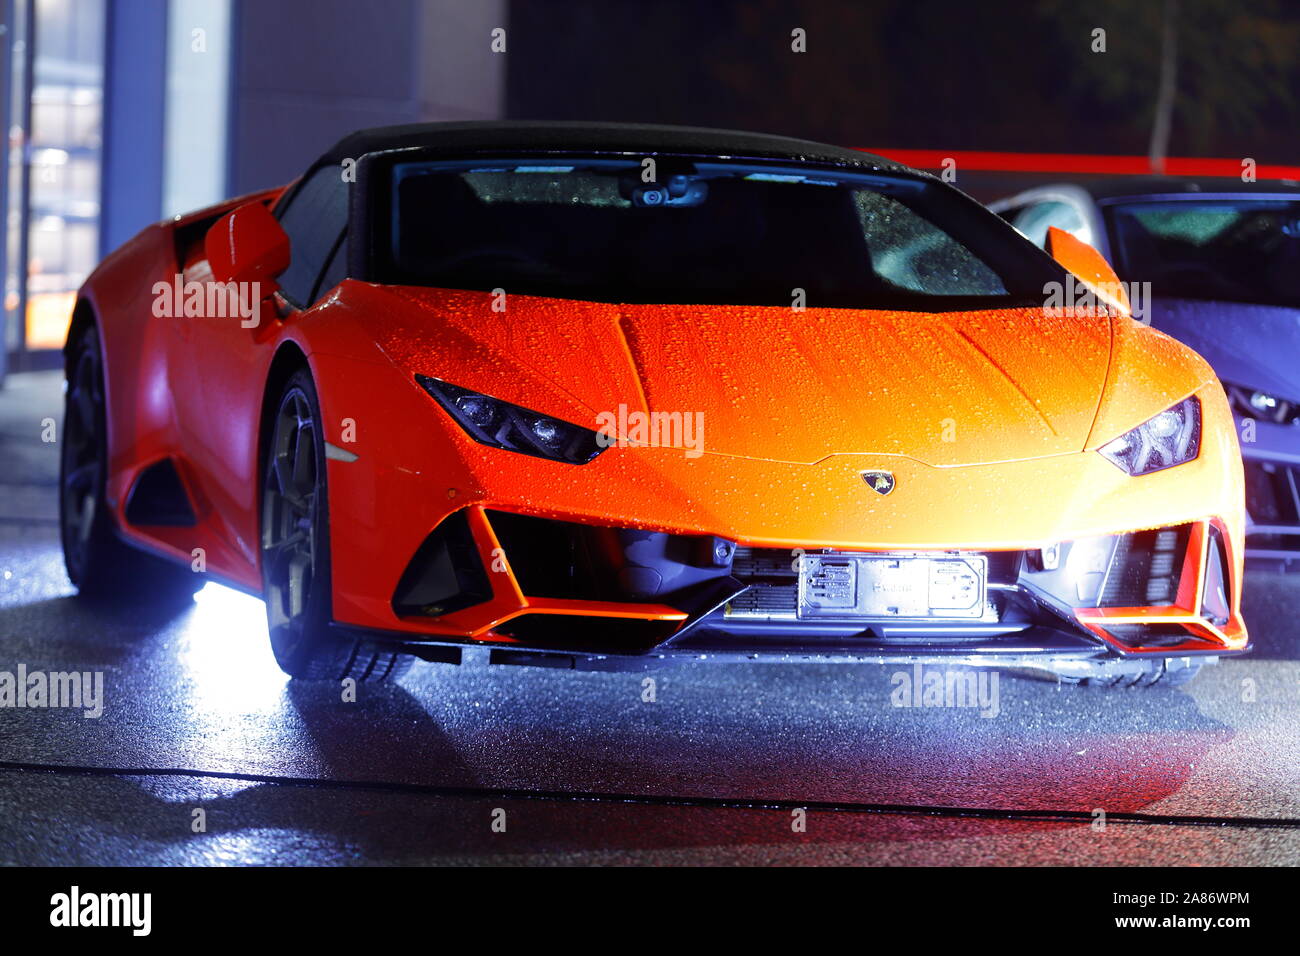 Lamborghinis lit up at night for a private event at the new Lamborghini dealership in Leeds. The store officially opened on 7th November. Stock Photo